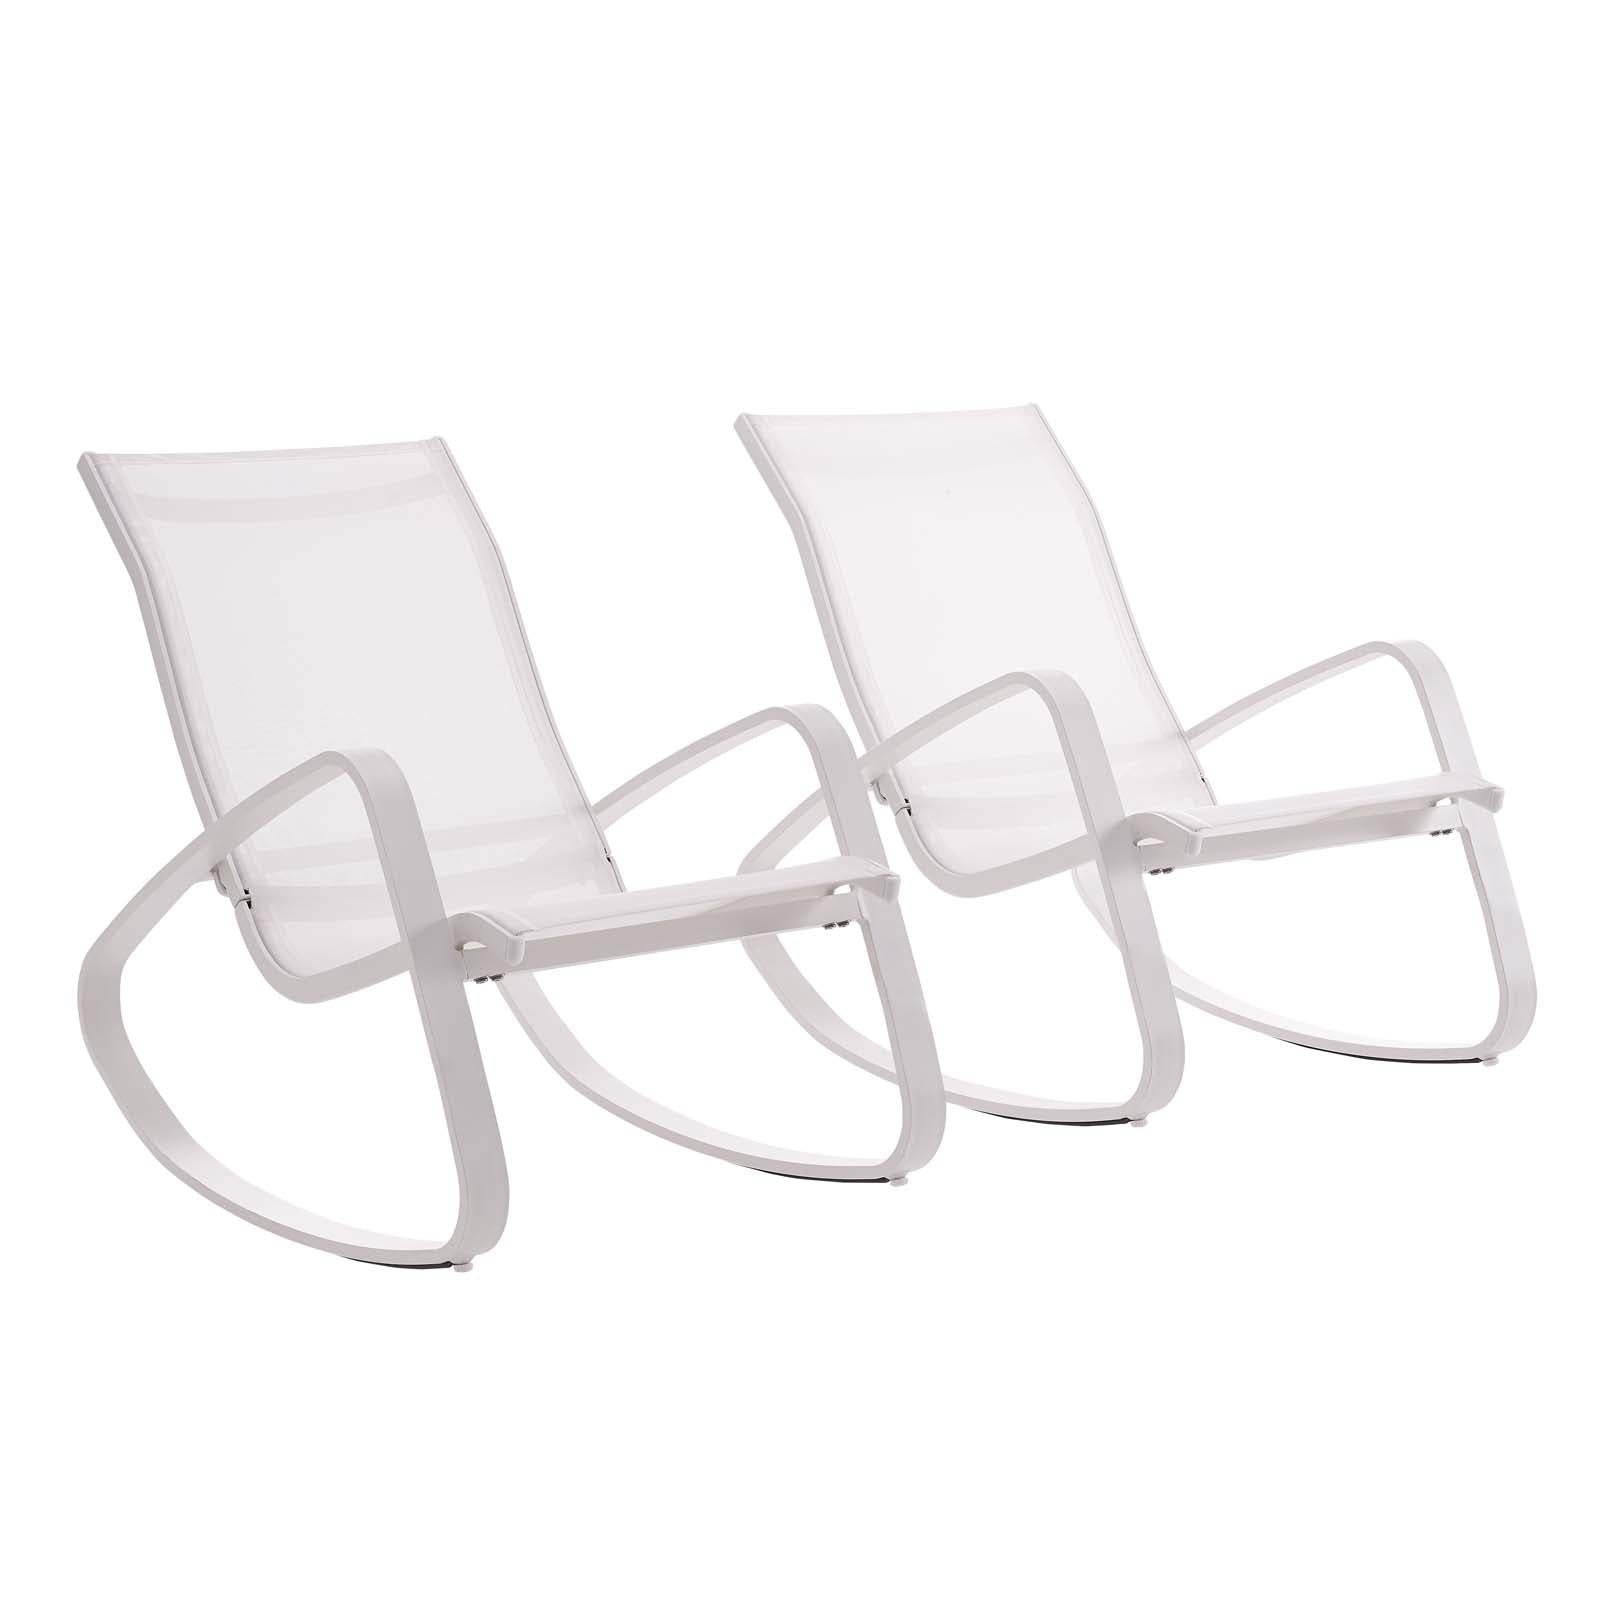 Modway Outdoor Chairs - Traveler Rocking Lounge Chair Outdoor Patio Mesh Sling Set of 2 White White